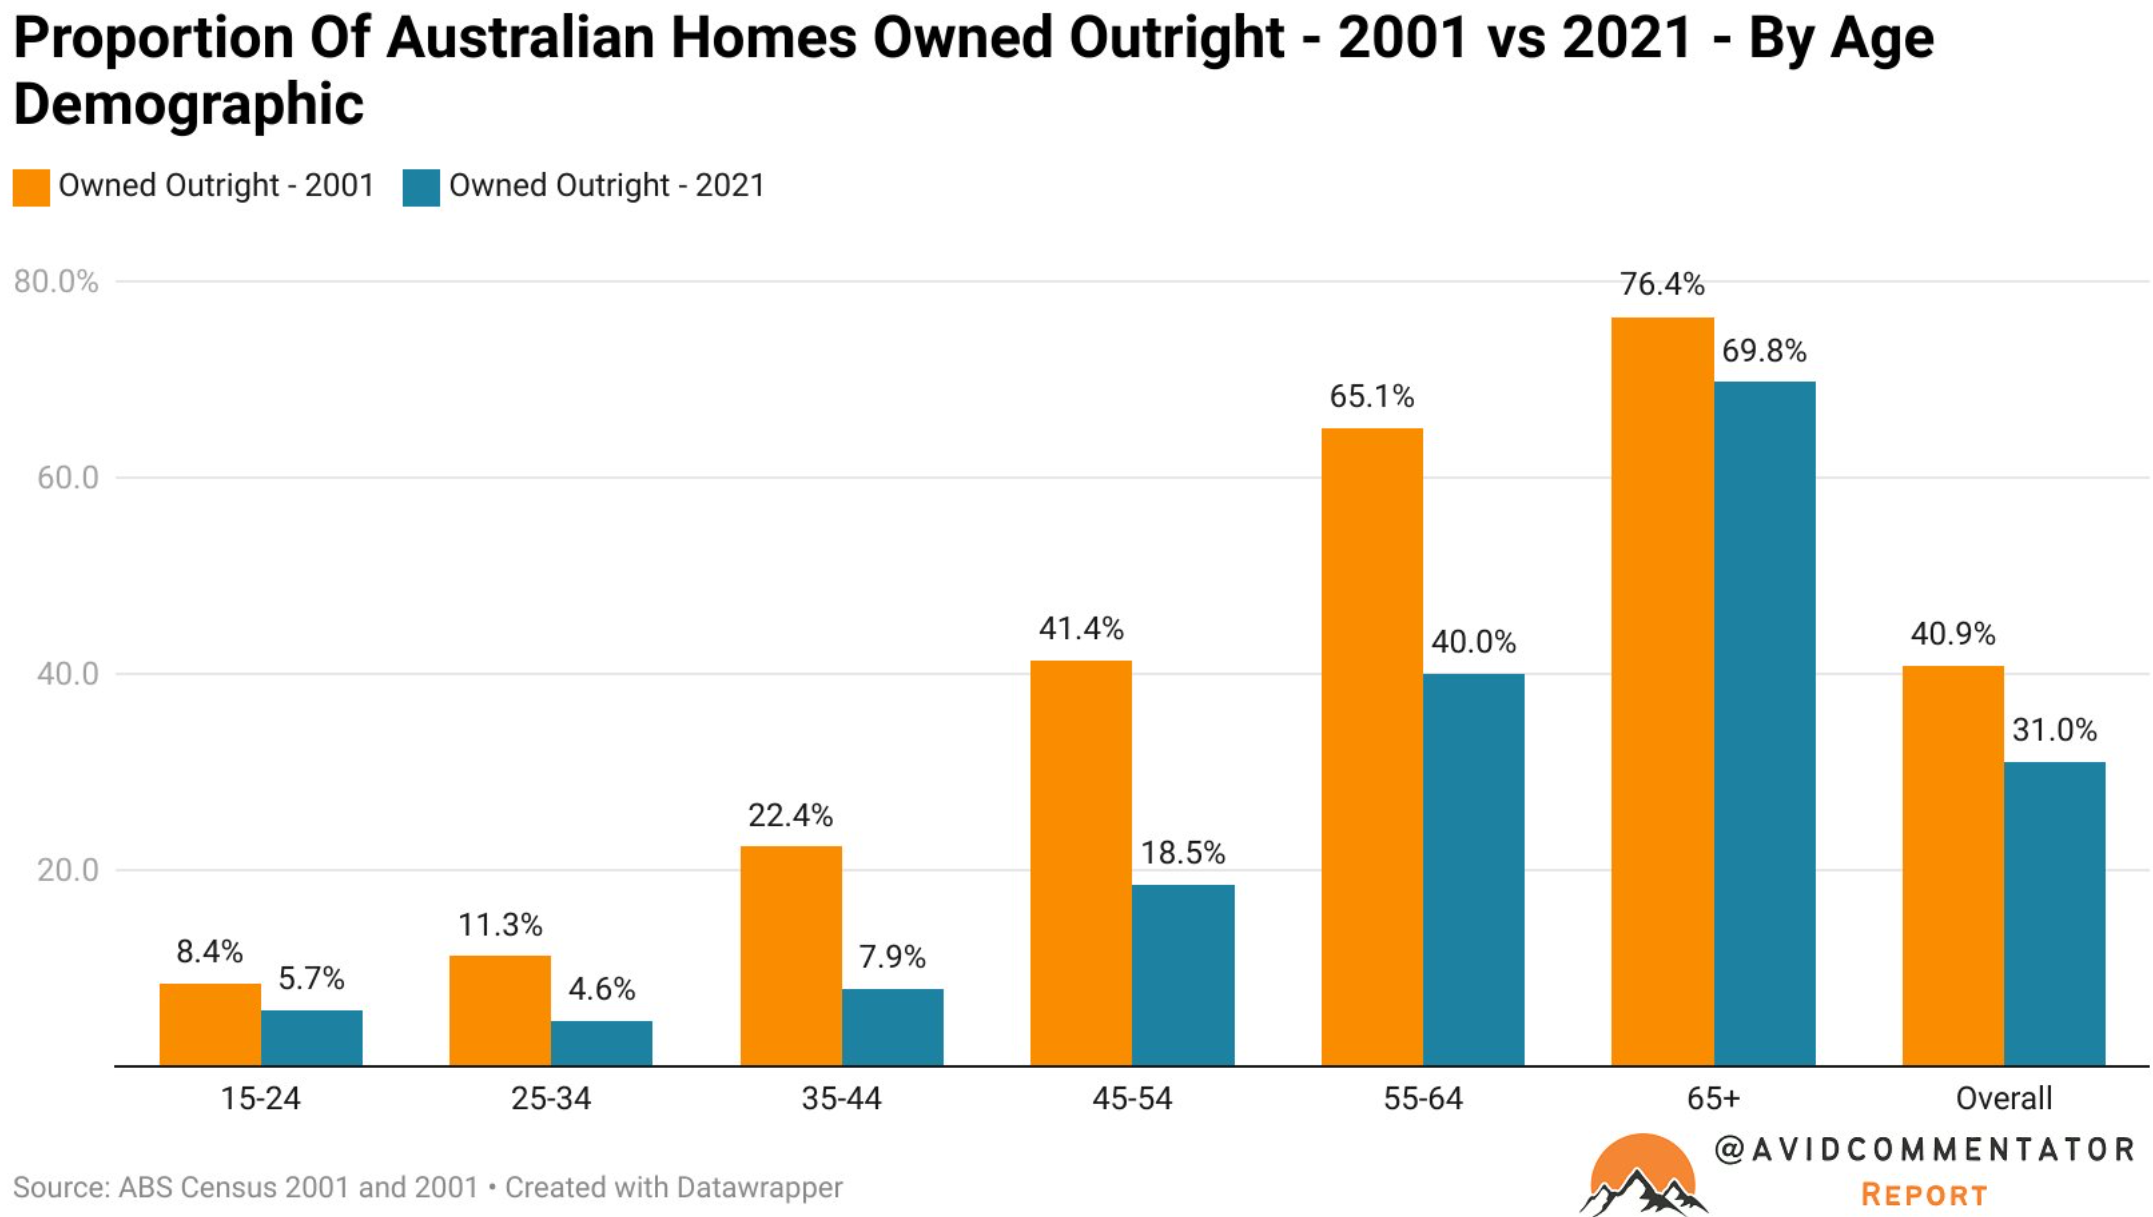 Proportion of Australian homes owned outright